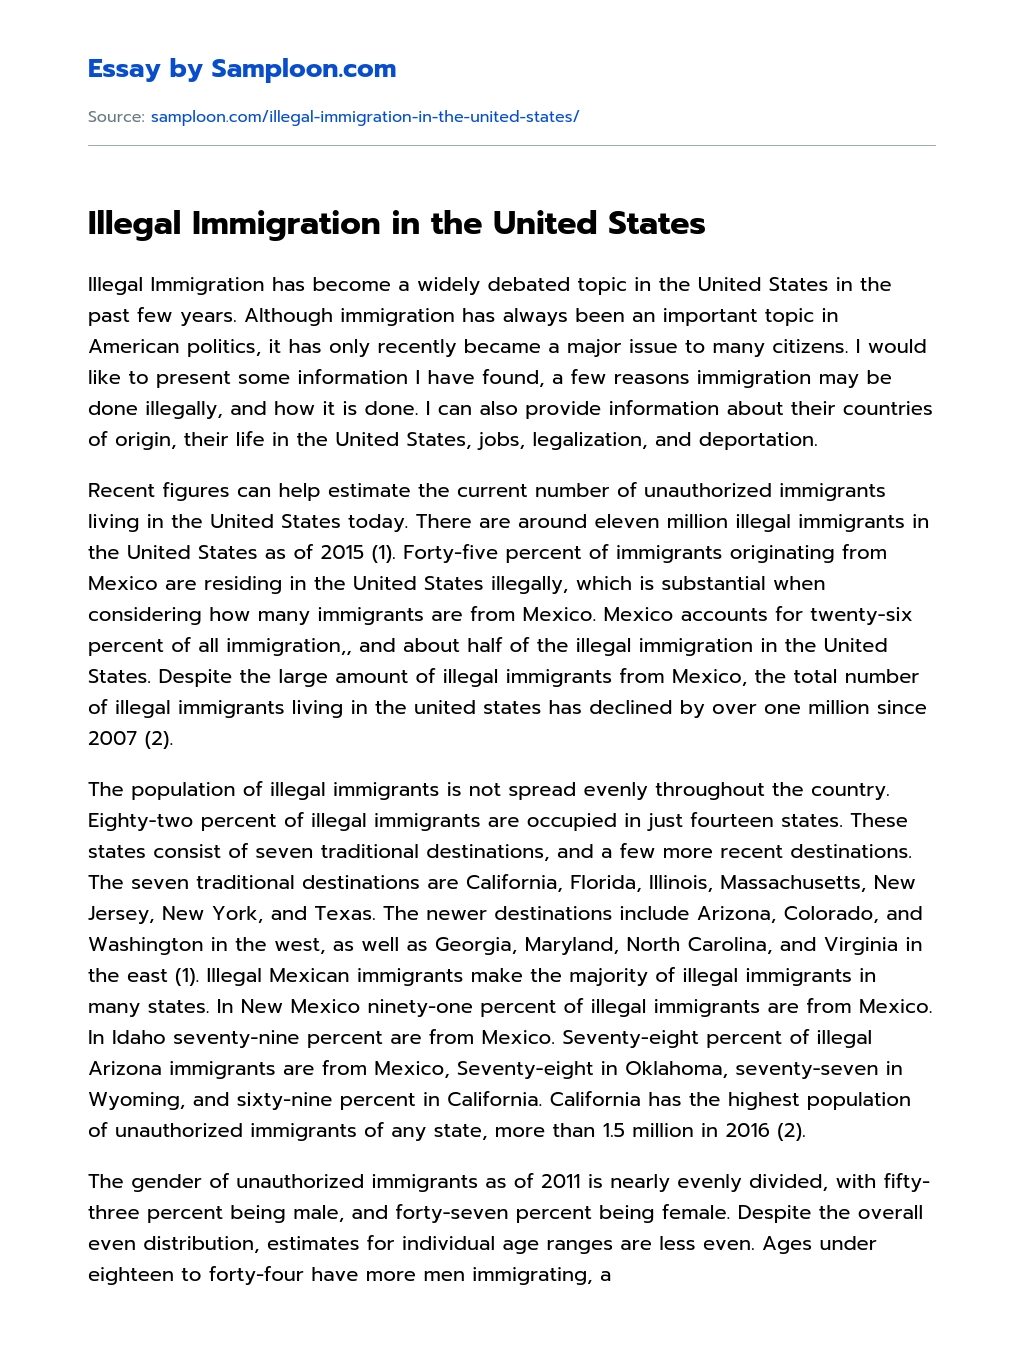 Illegal Immigration in the United States essay